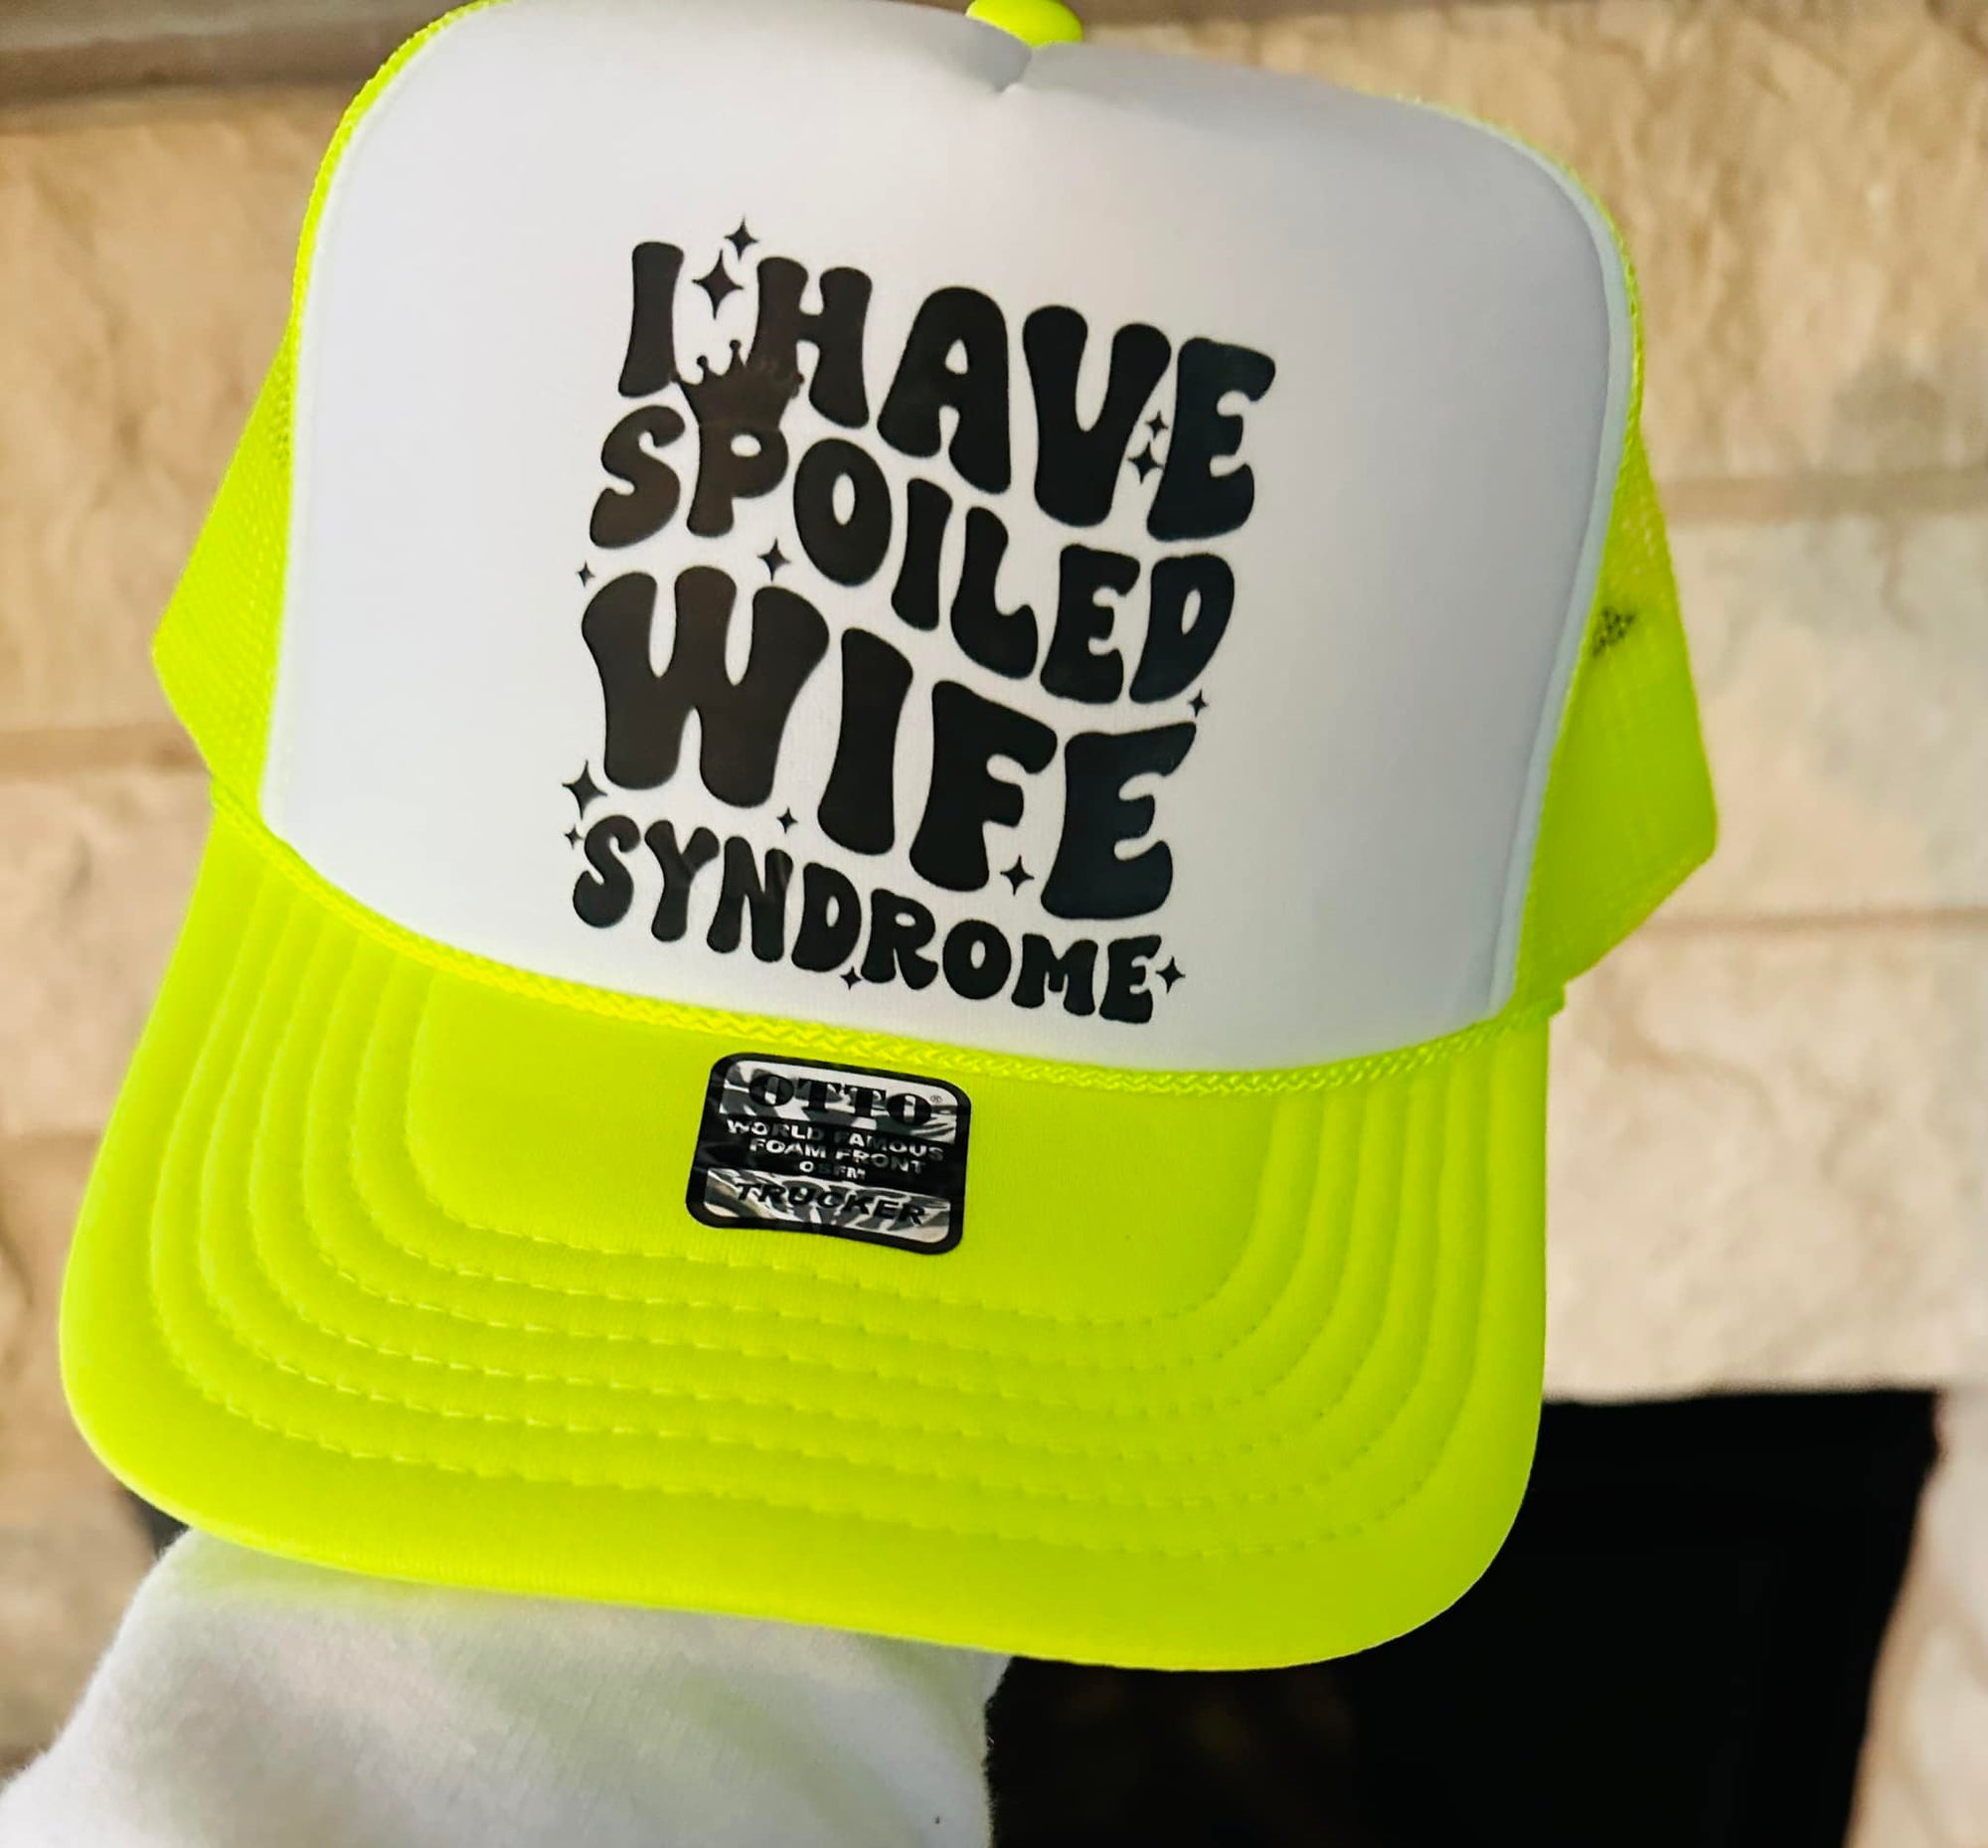 Spoiled Wife Syndrome DTF Printed Trucker Hat